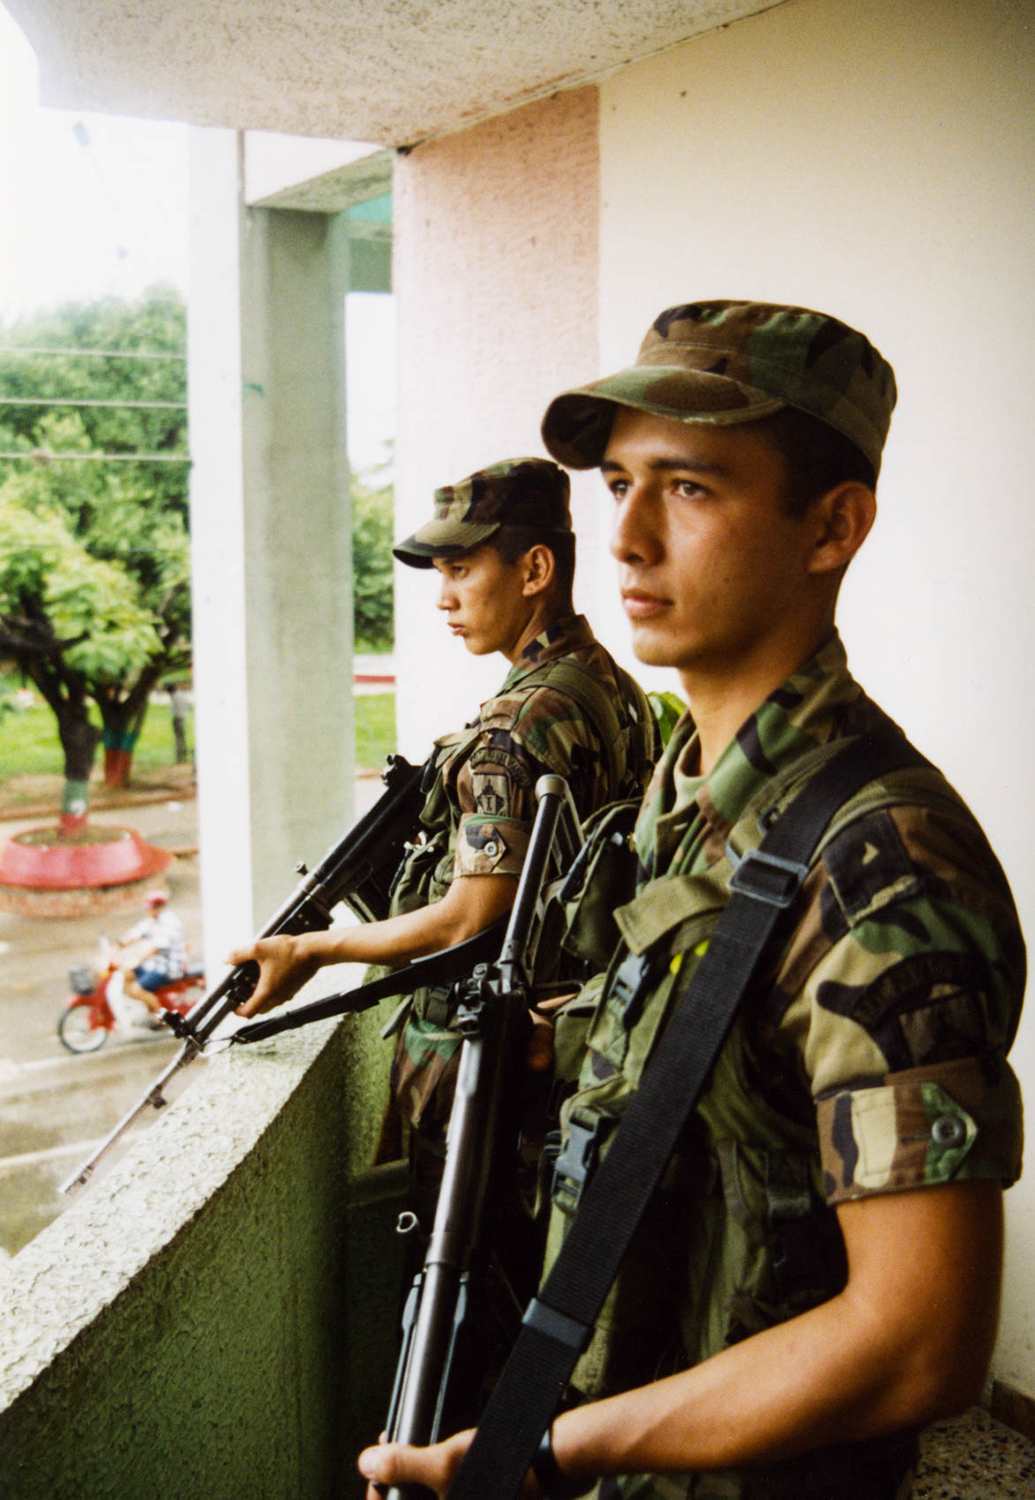 <p>Two soldiers on sentry duty in Tame, Arauca. Both men were part of Colombia's 'Soldados de mi pueblo' initiative, which inducted locally born men into military service in their own communities in an attempt to bolster security. </p>